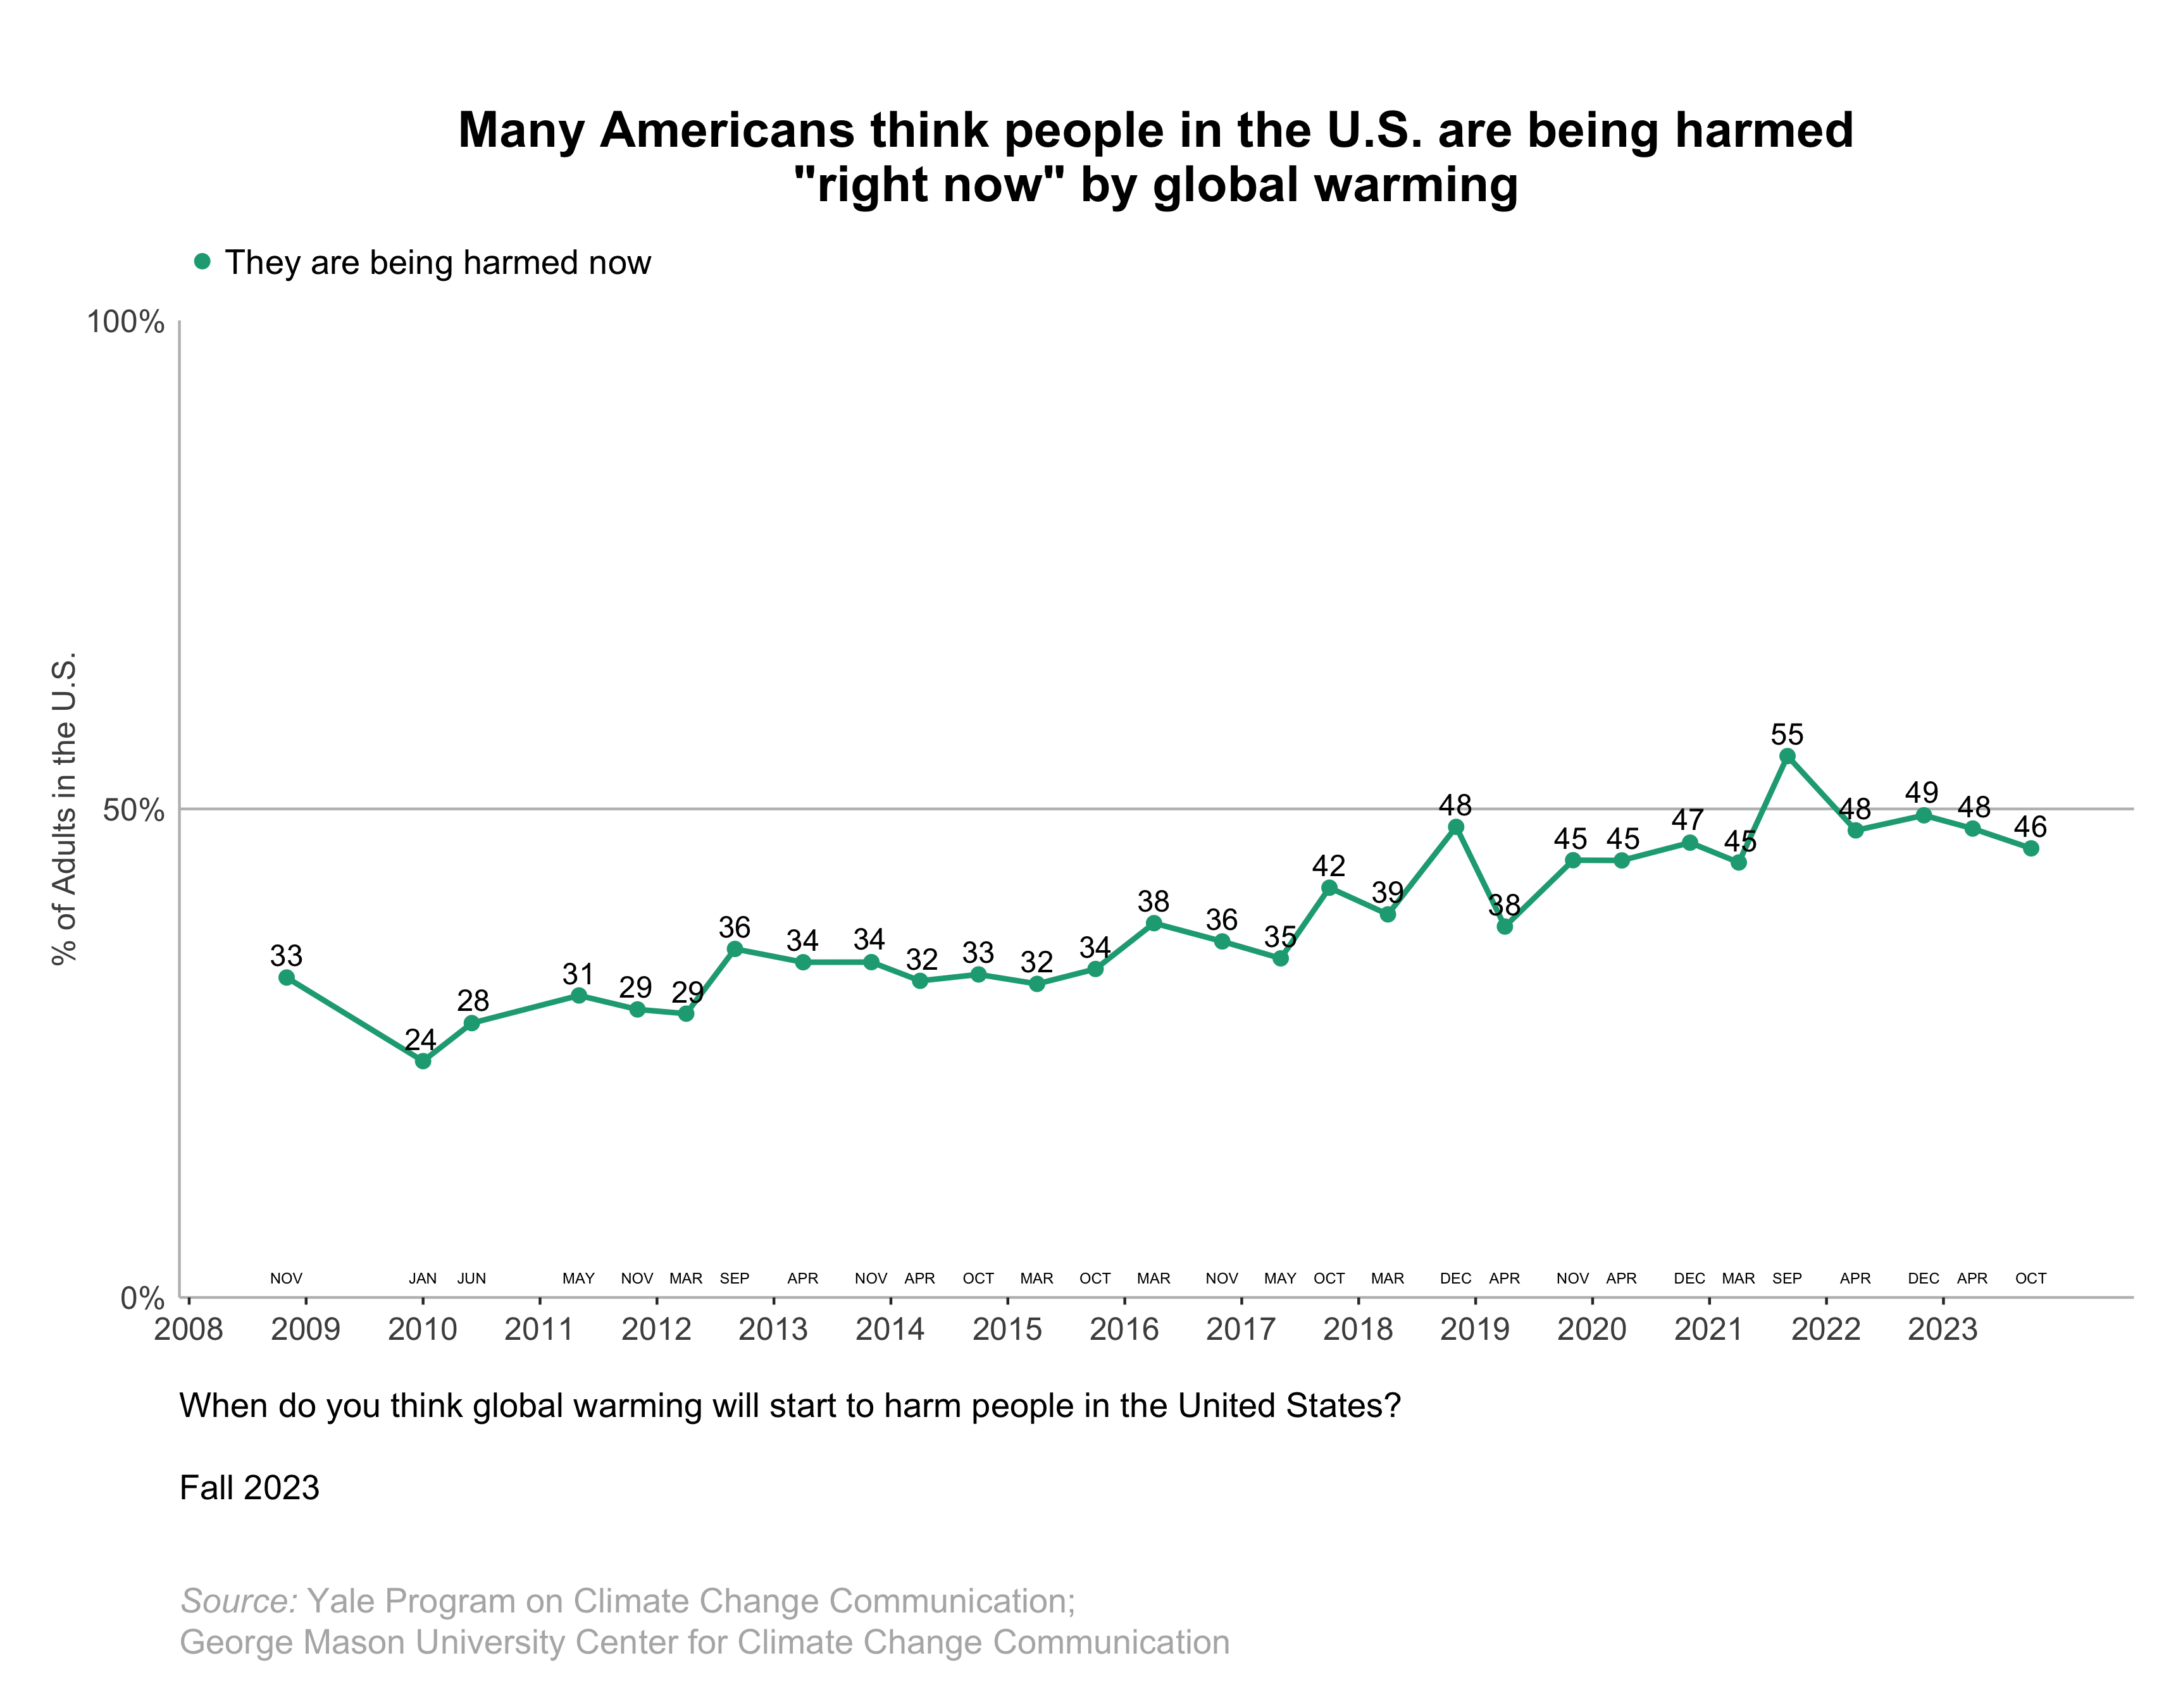 This line graph shows the percentage of Americans over time since 2008 who think people in the U.S. are being harmed "right now" by global warming. Many Americans think people in the U.S. are being harmed "right now" by global warming. Data: Climate Change in the American Mind, Fall 2023. Refer to the data tables in Appendix 1 of the report for all percentages.